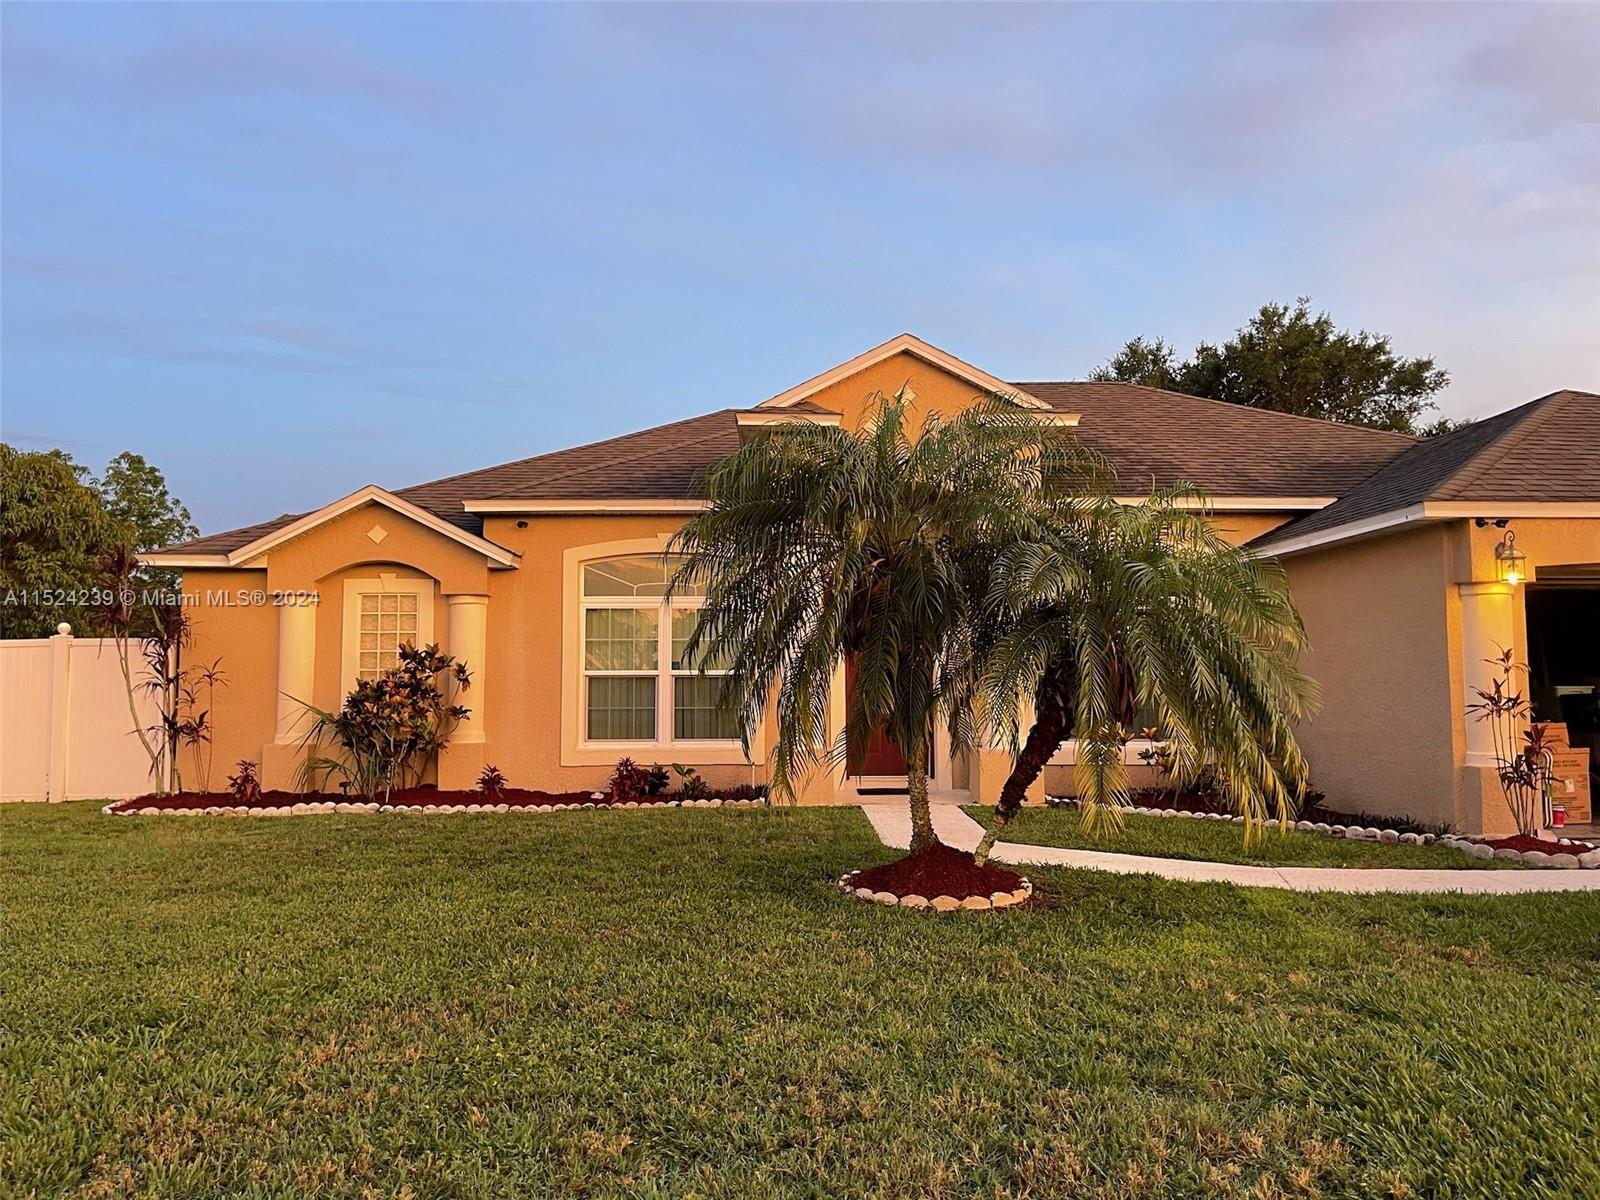 Photo of 3518 Beau Chene Dr in Kissimmee, FL